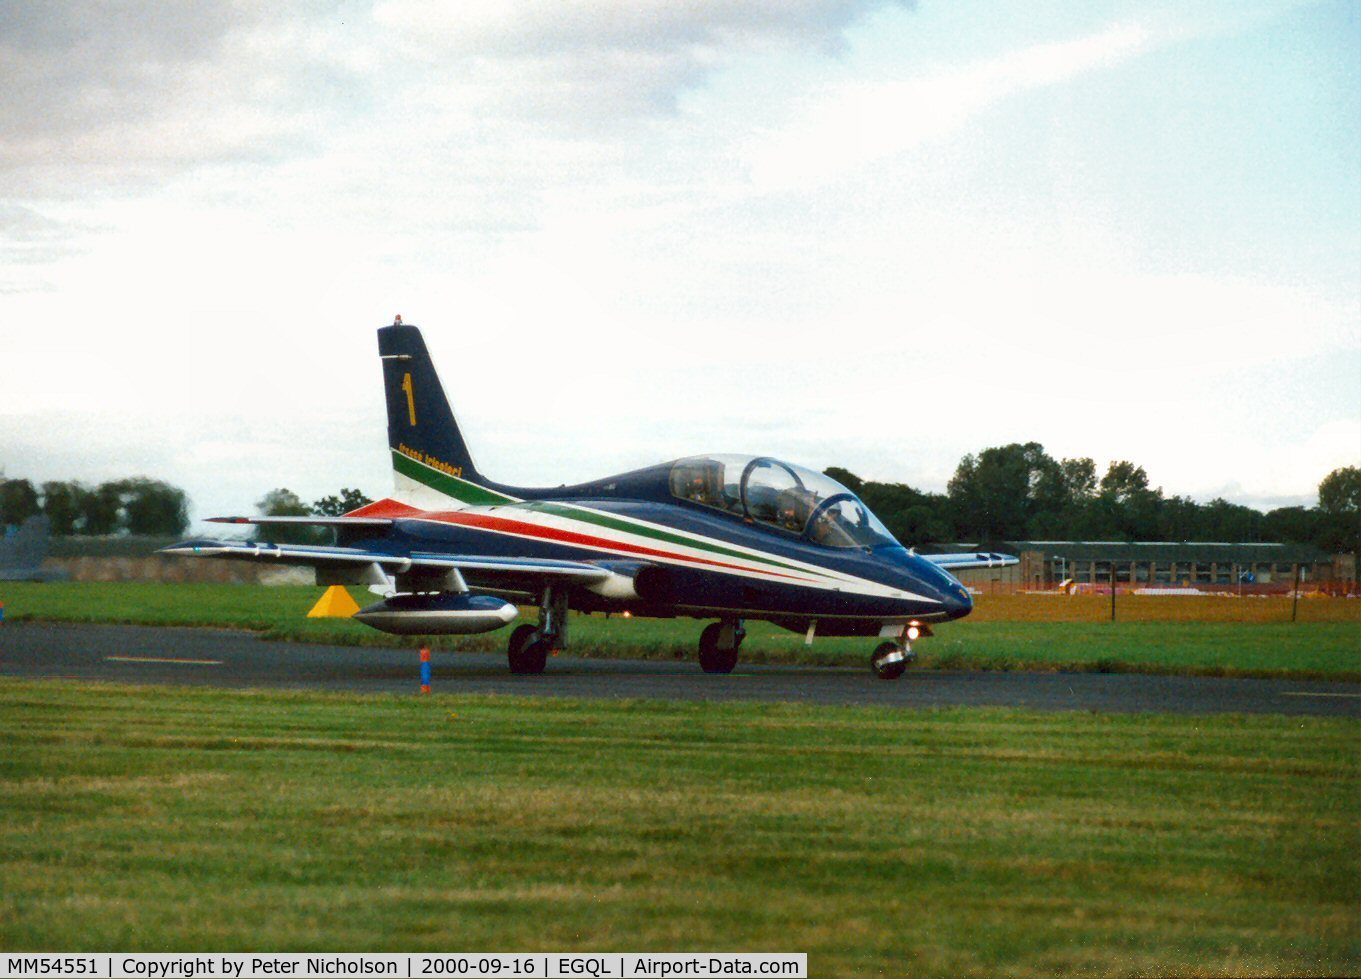 MM54551, Aermacchi MB-339PAN C/N 6772/167/AD018, Lead aircraft number 1 of the Italian Air Force's Frecce Tricolori taxying at the 2000 Leuchars Airshow.